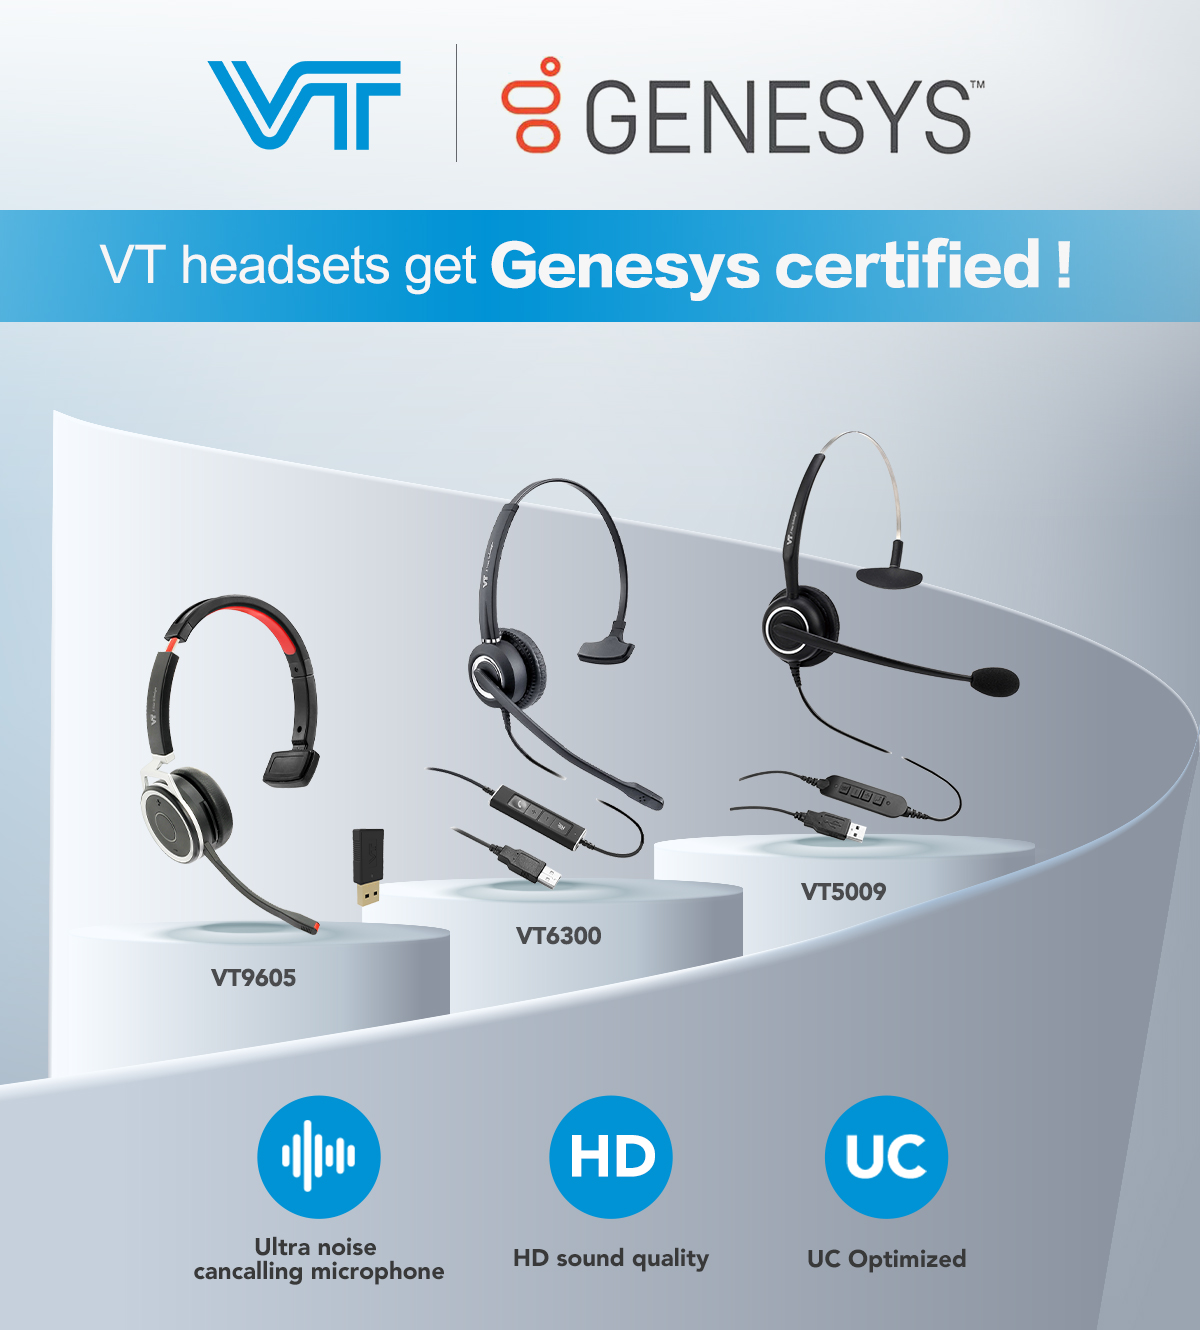 Three VT Headsets Achieve Genesys Certification